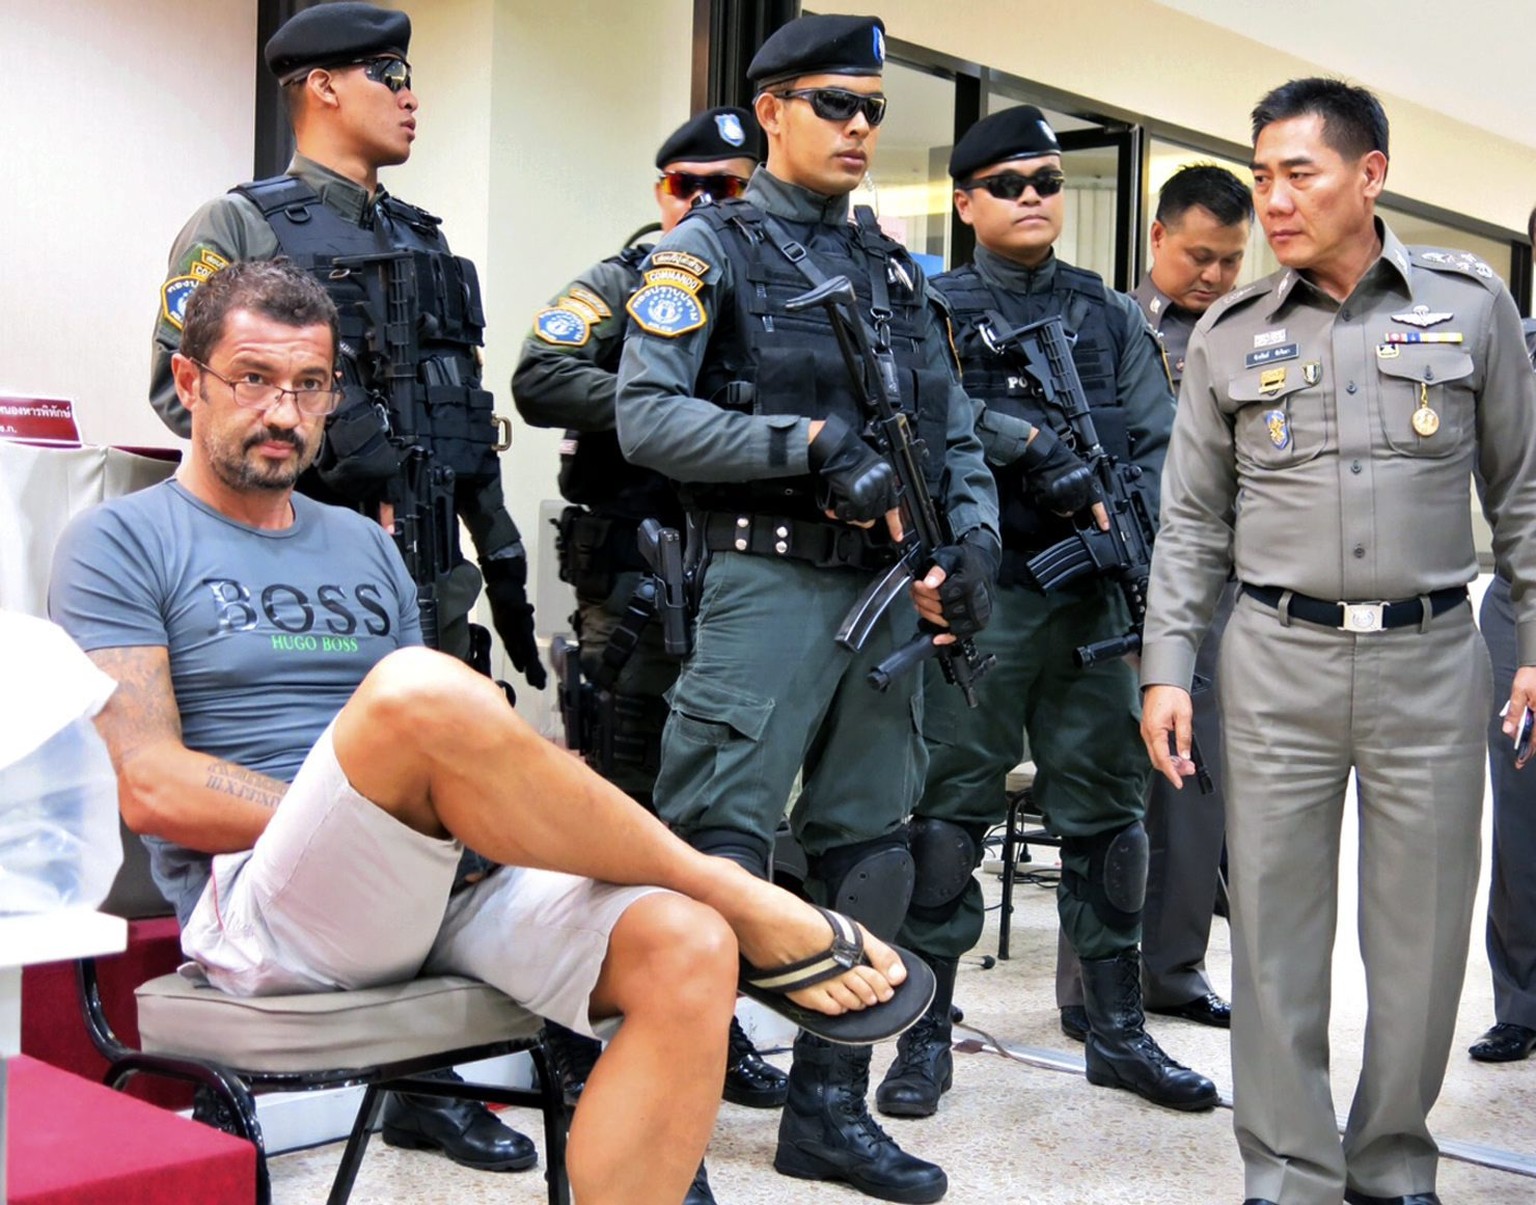 epa04866212 A photo made available on 30 July 2015 shows Andre Xavier Justo (L), Swiss national, alleged blackmail his former employer sits next to armed Thai police officers during a press conference ...